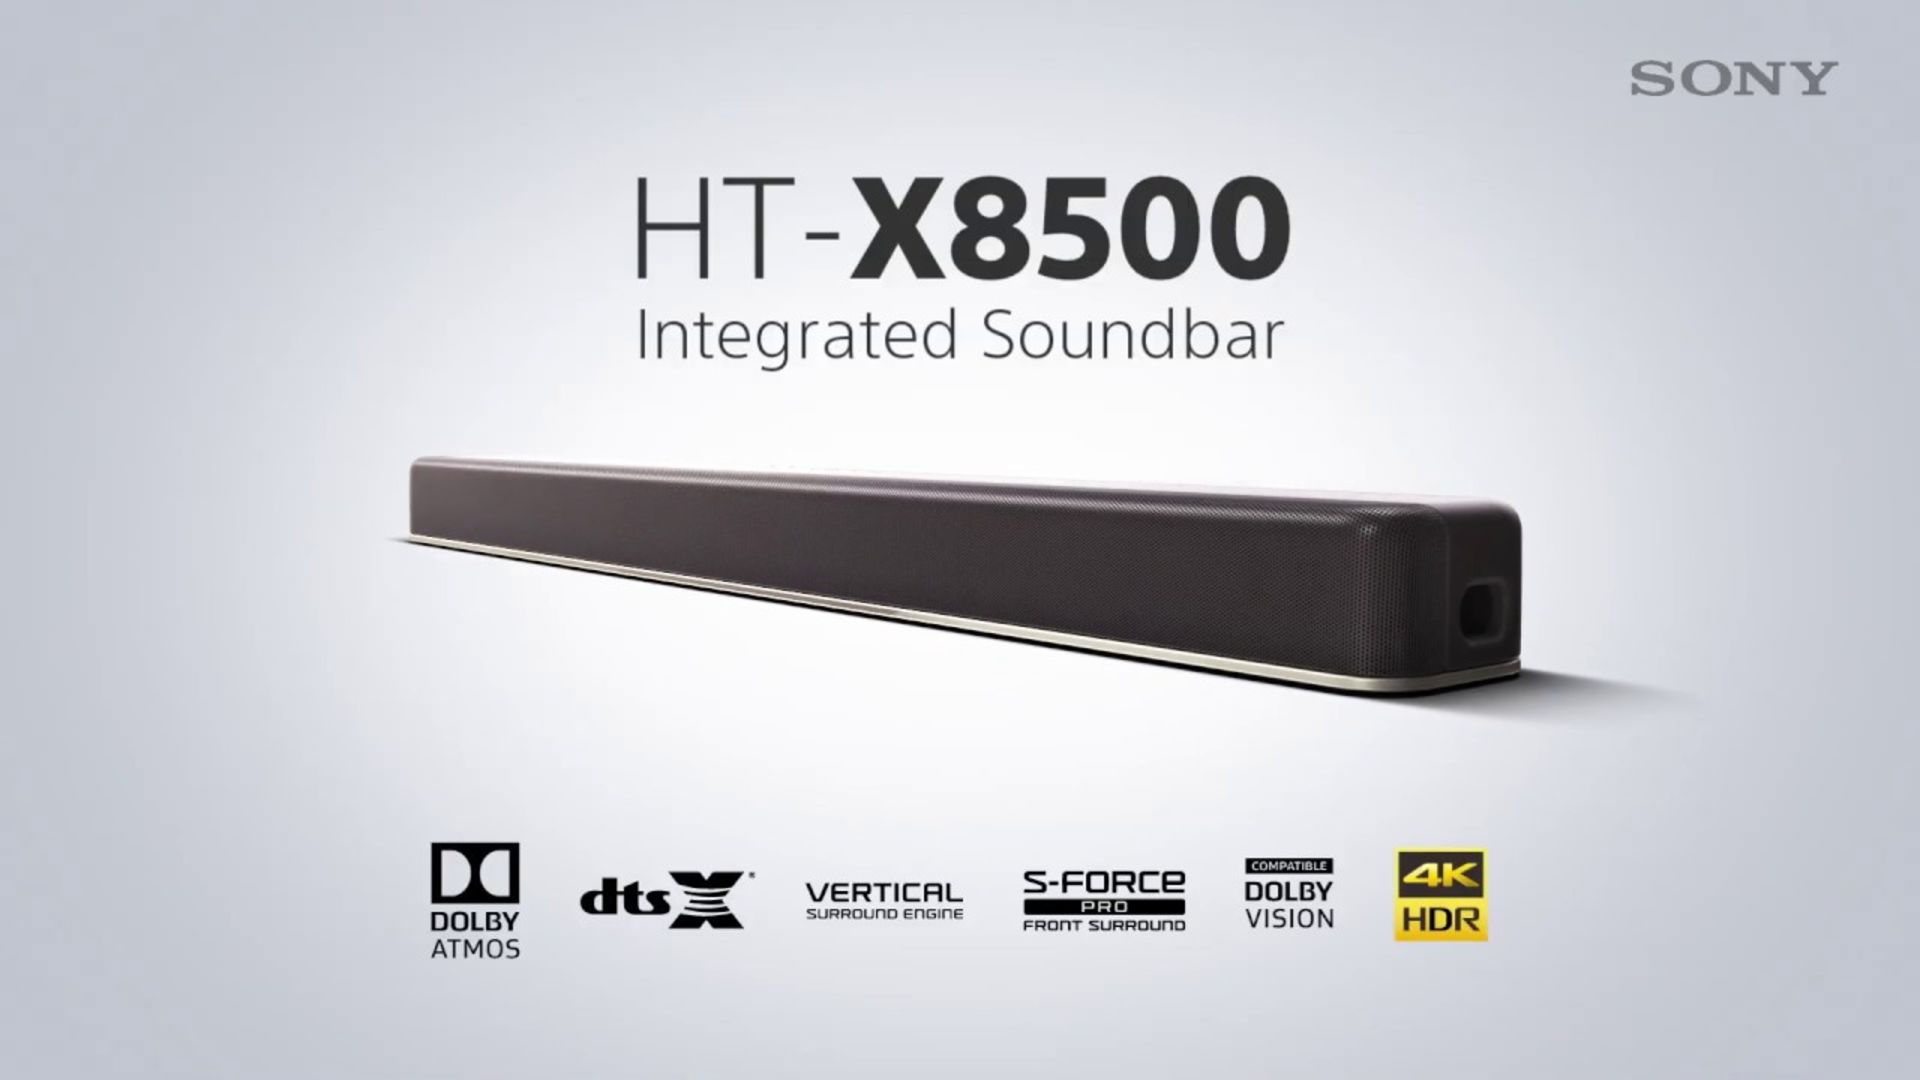 1 BOXED SONY HT-X8500 2.1CH DOLBY ATMOS SOUNDBAR WITH BUILT-IN SUBWOOFER RRP Â£349.99